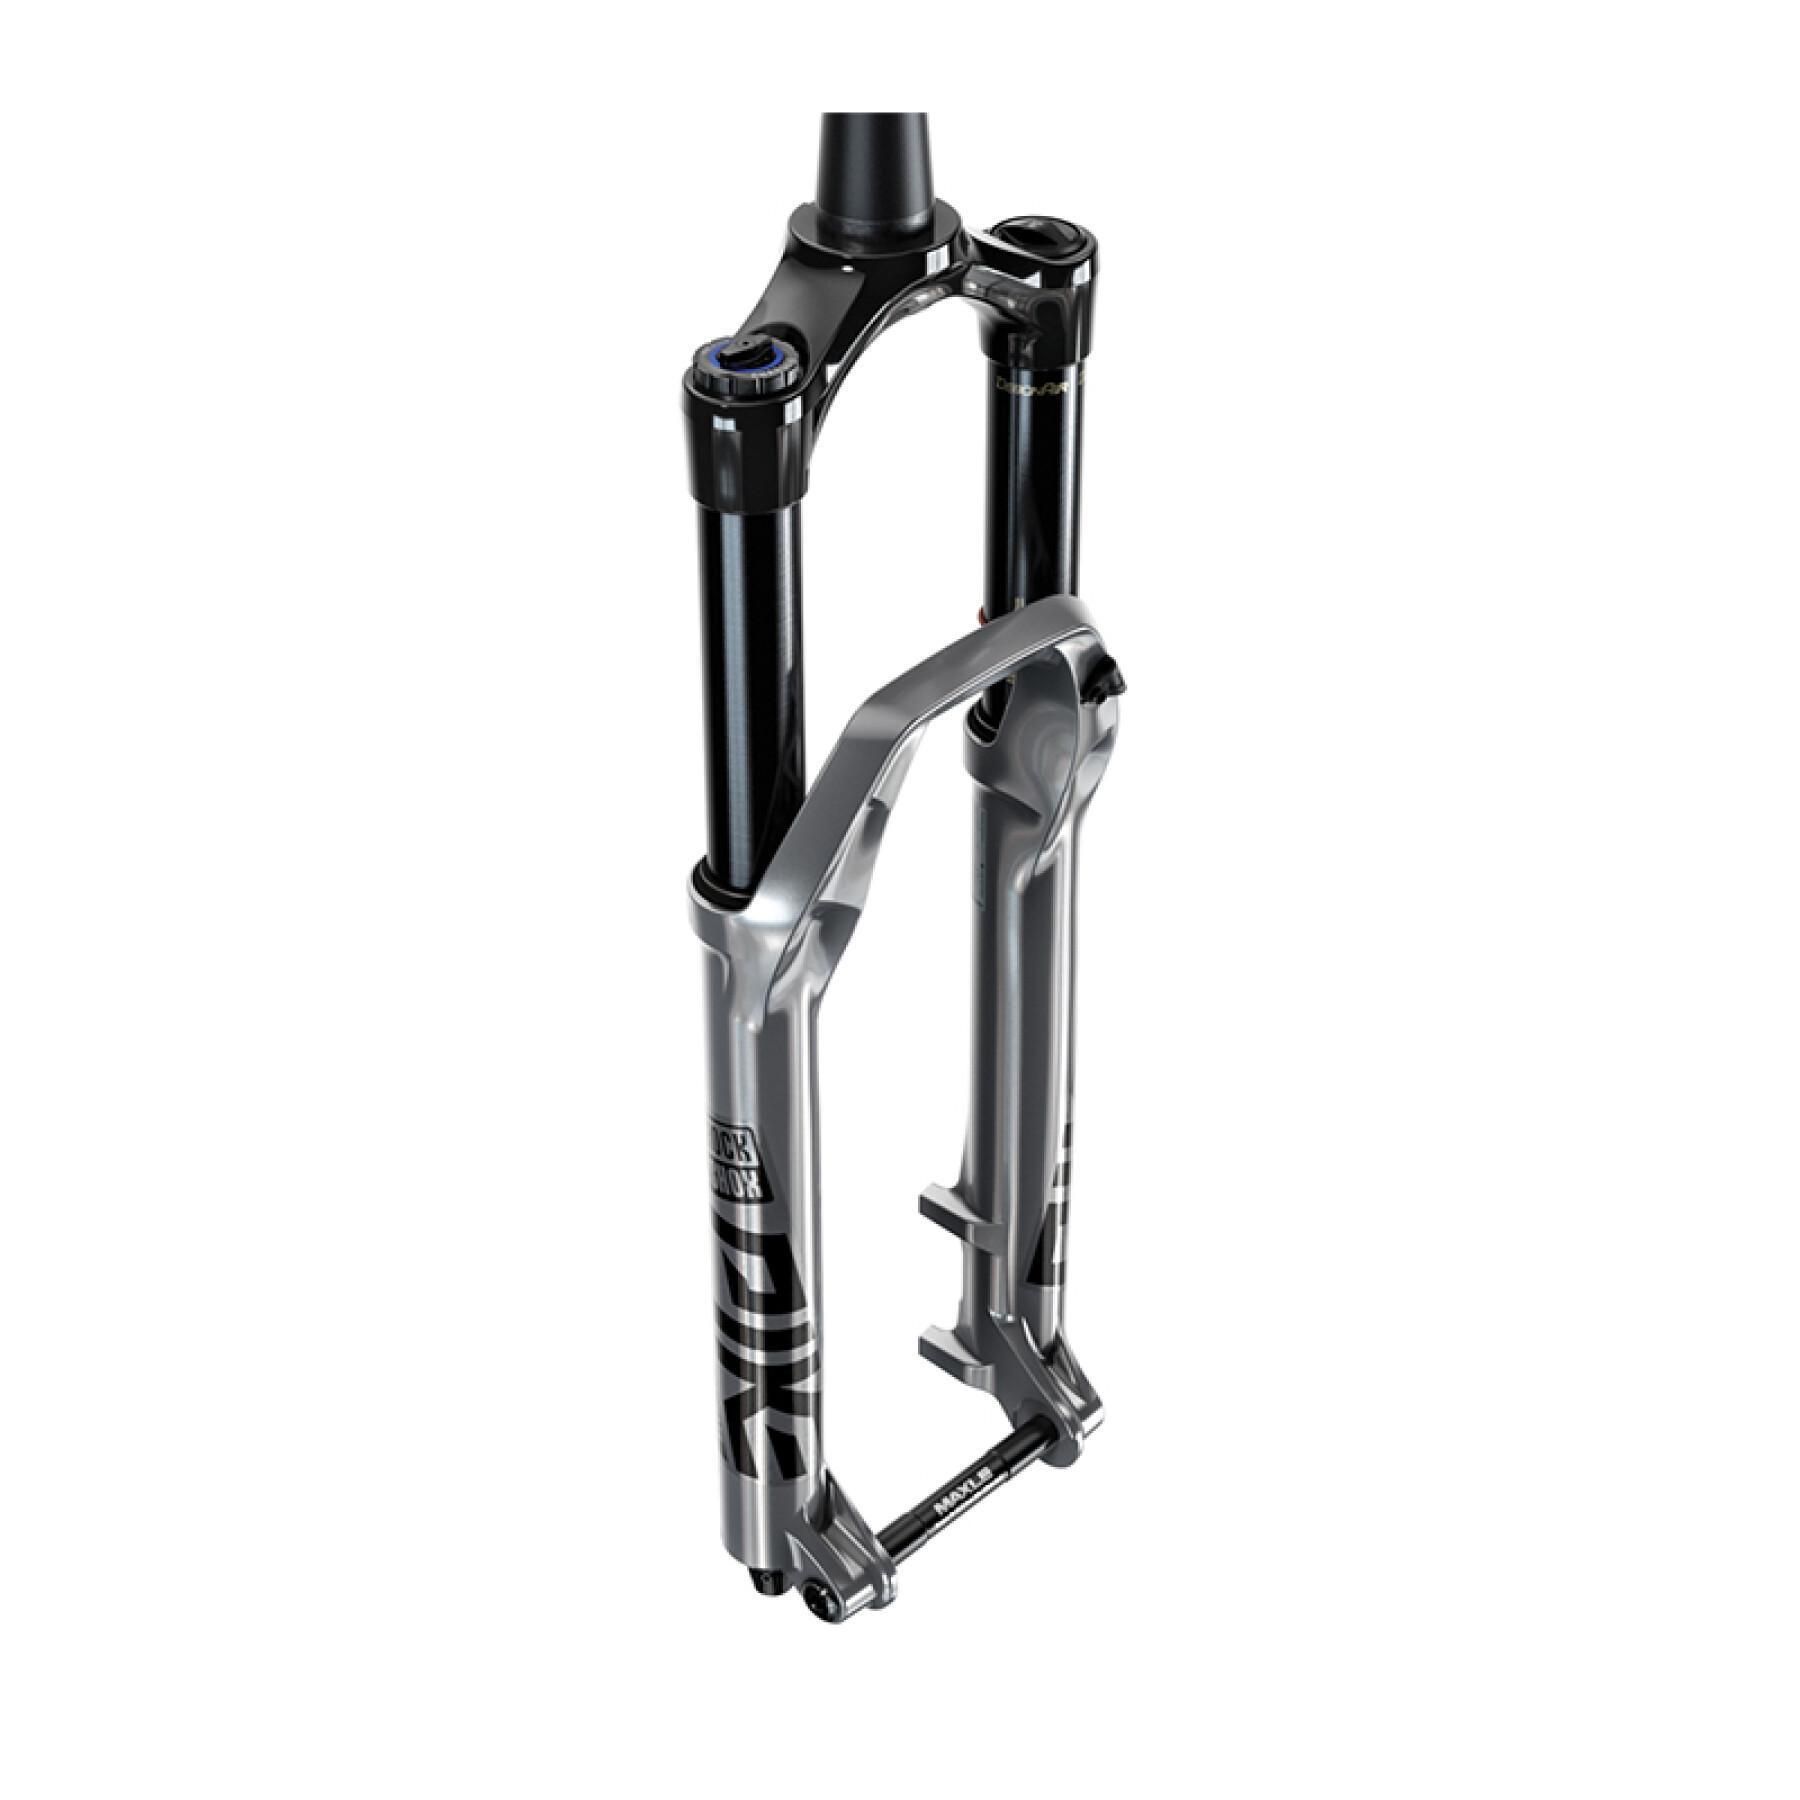 Forcella conica in alluminio Rockshox Pike Ultimate Charger 2.1 RC2 Boost 51 Offs Debon 27.5"